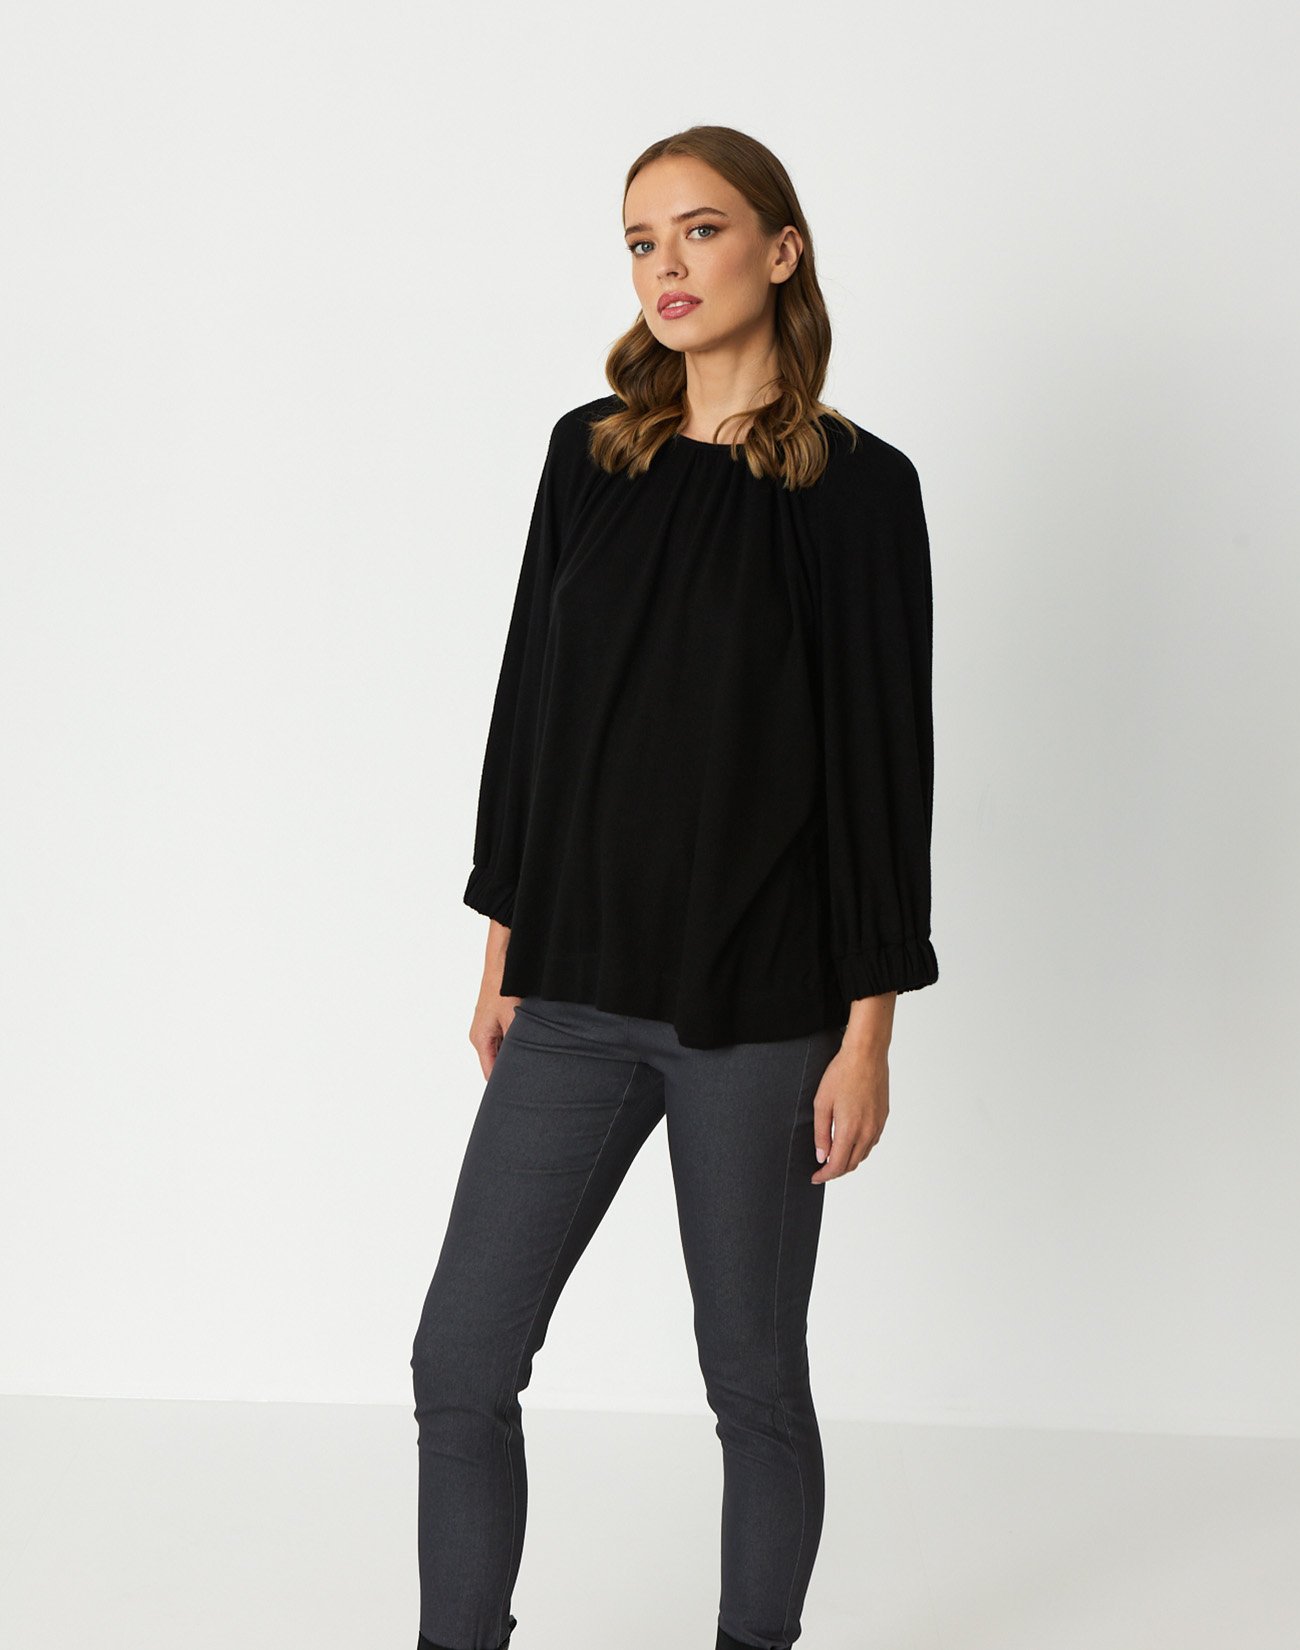 Oversized top with gather detail